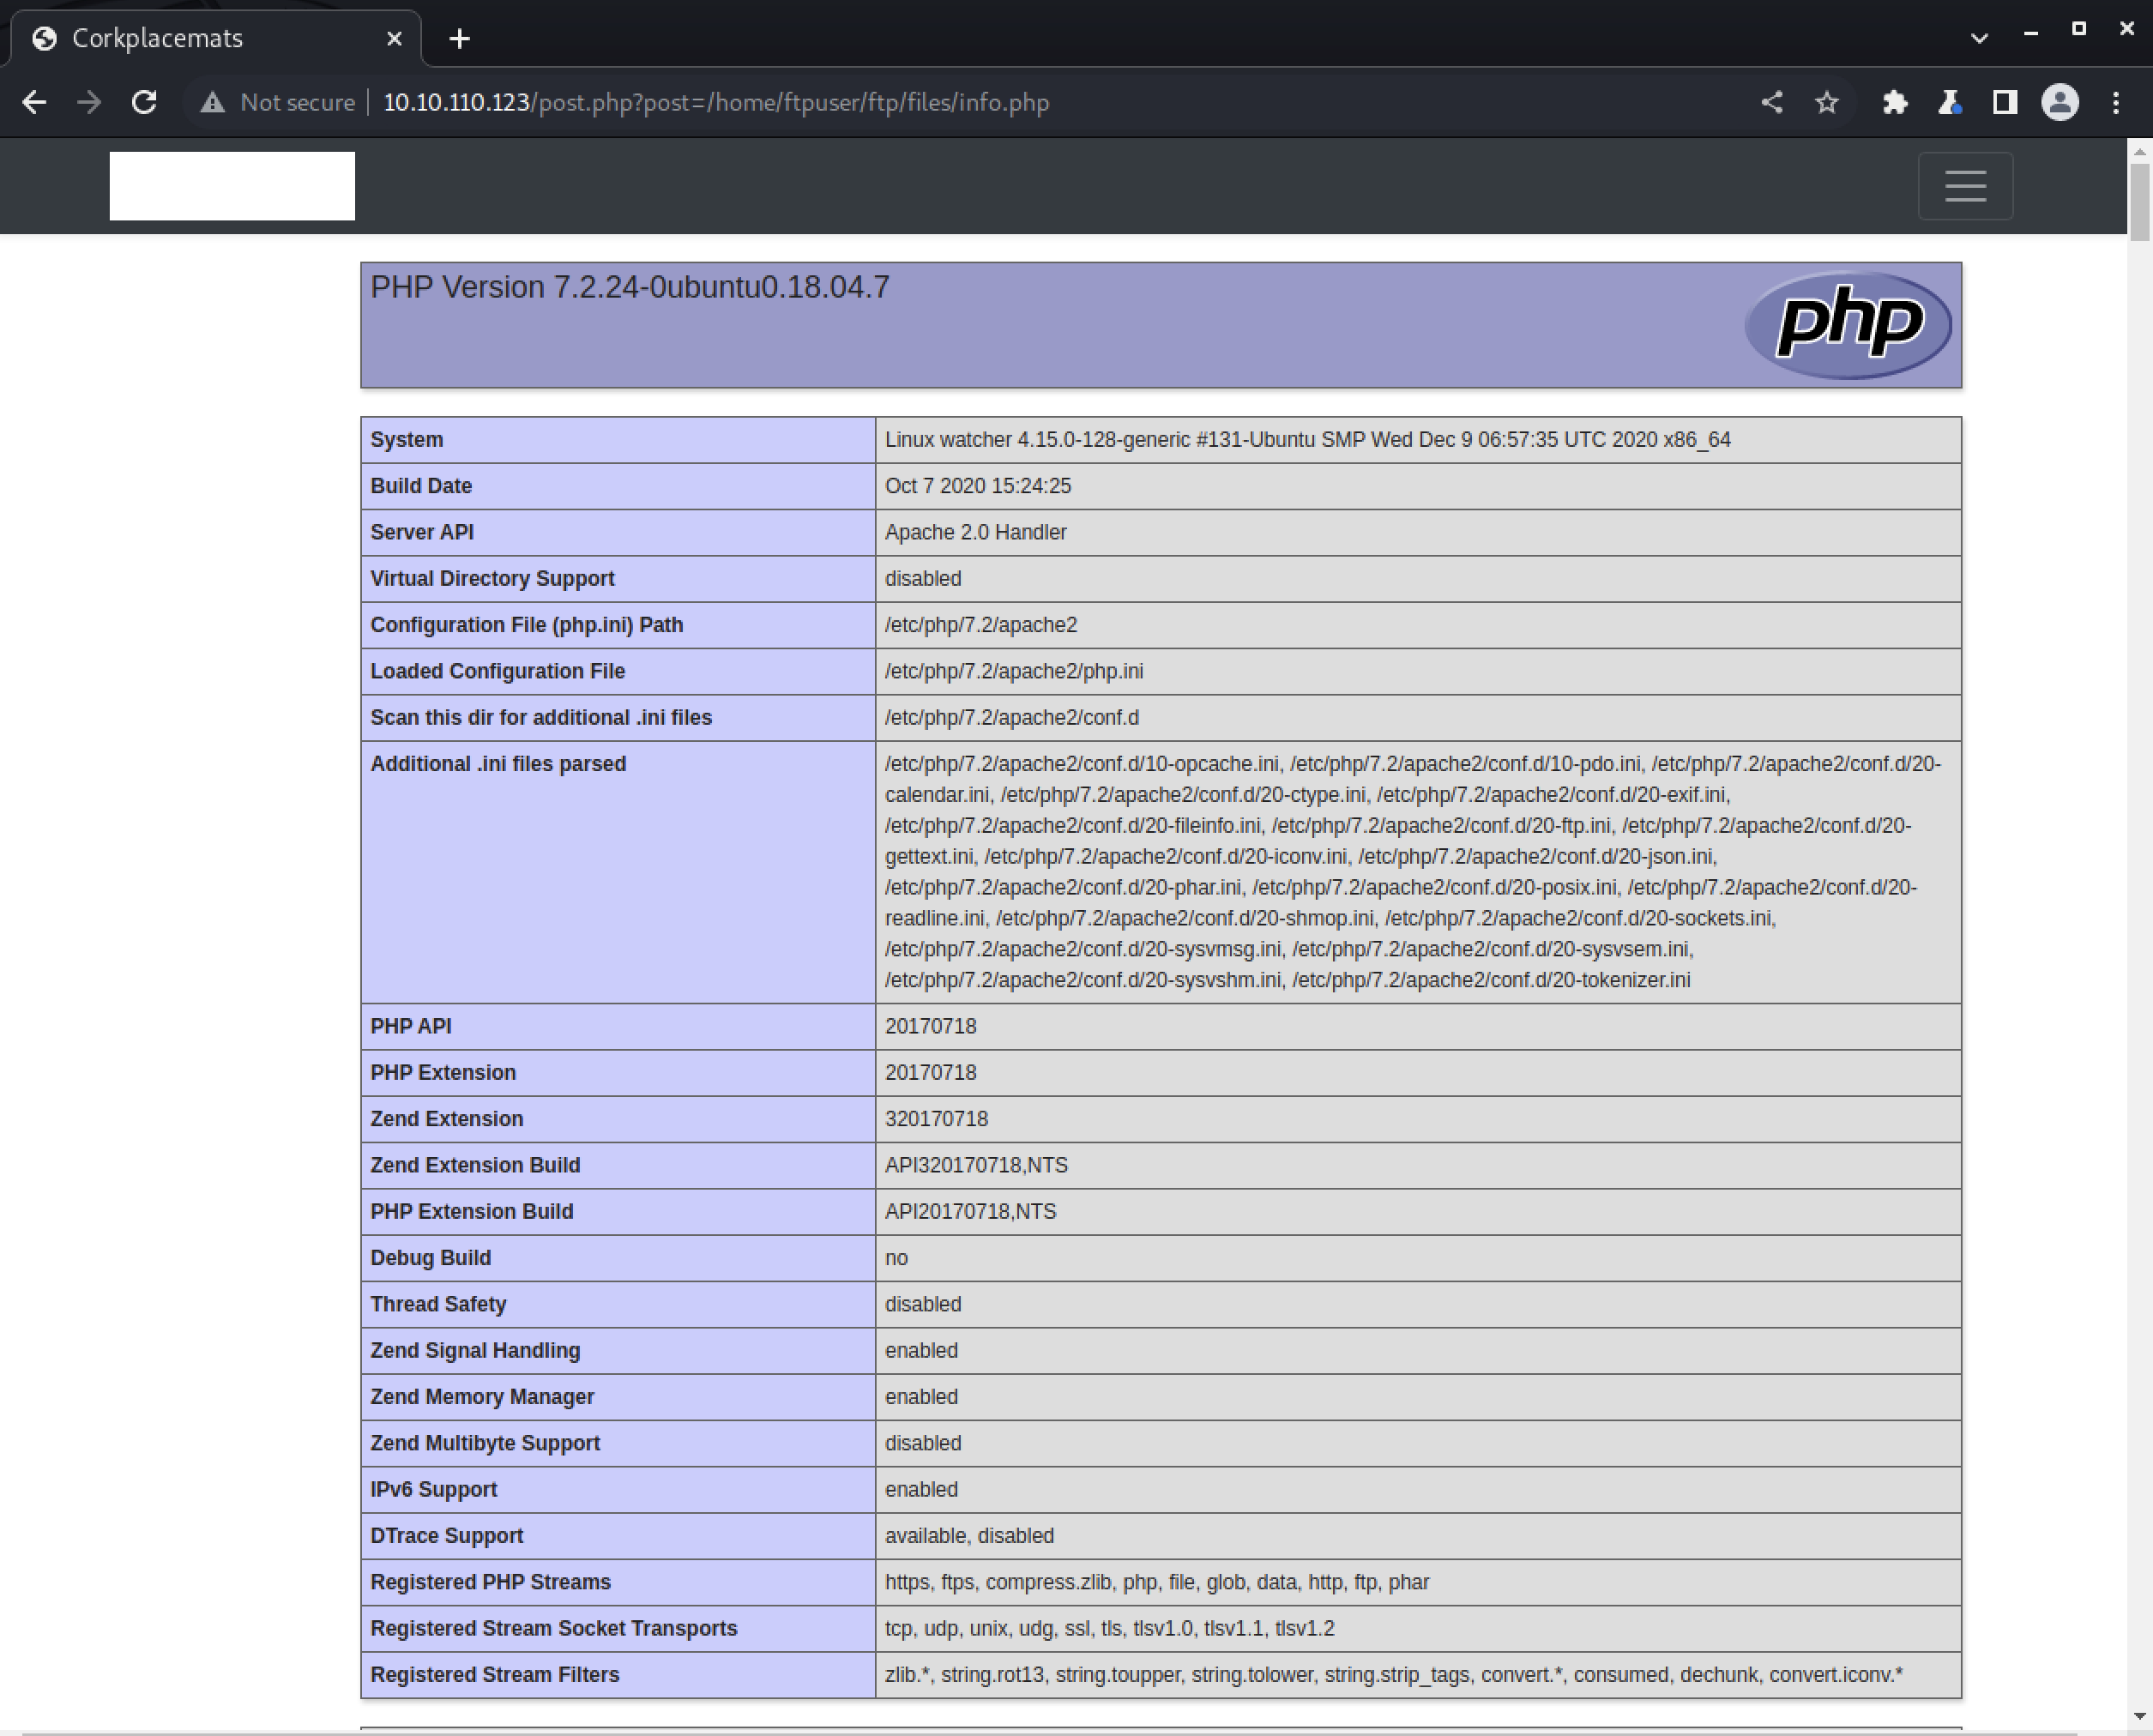 Viewing phpinfo() via file uploaded through FTP